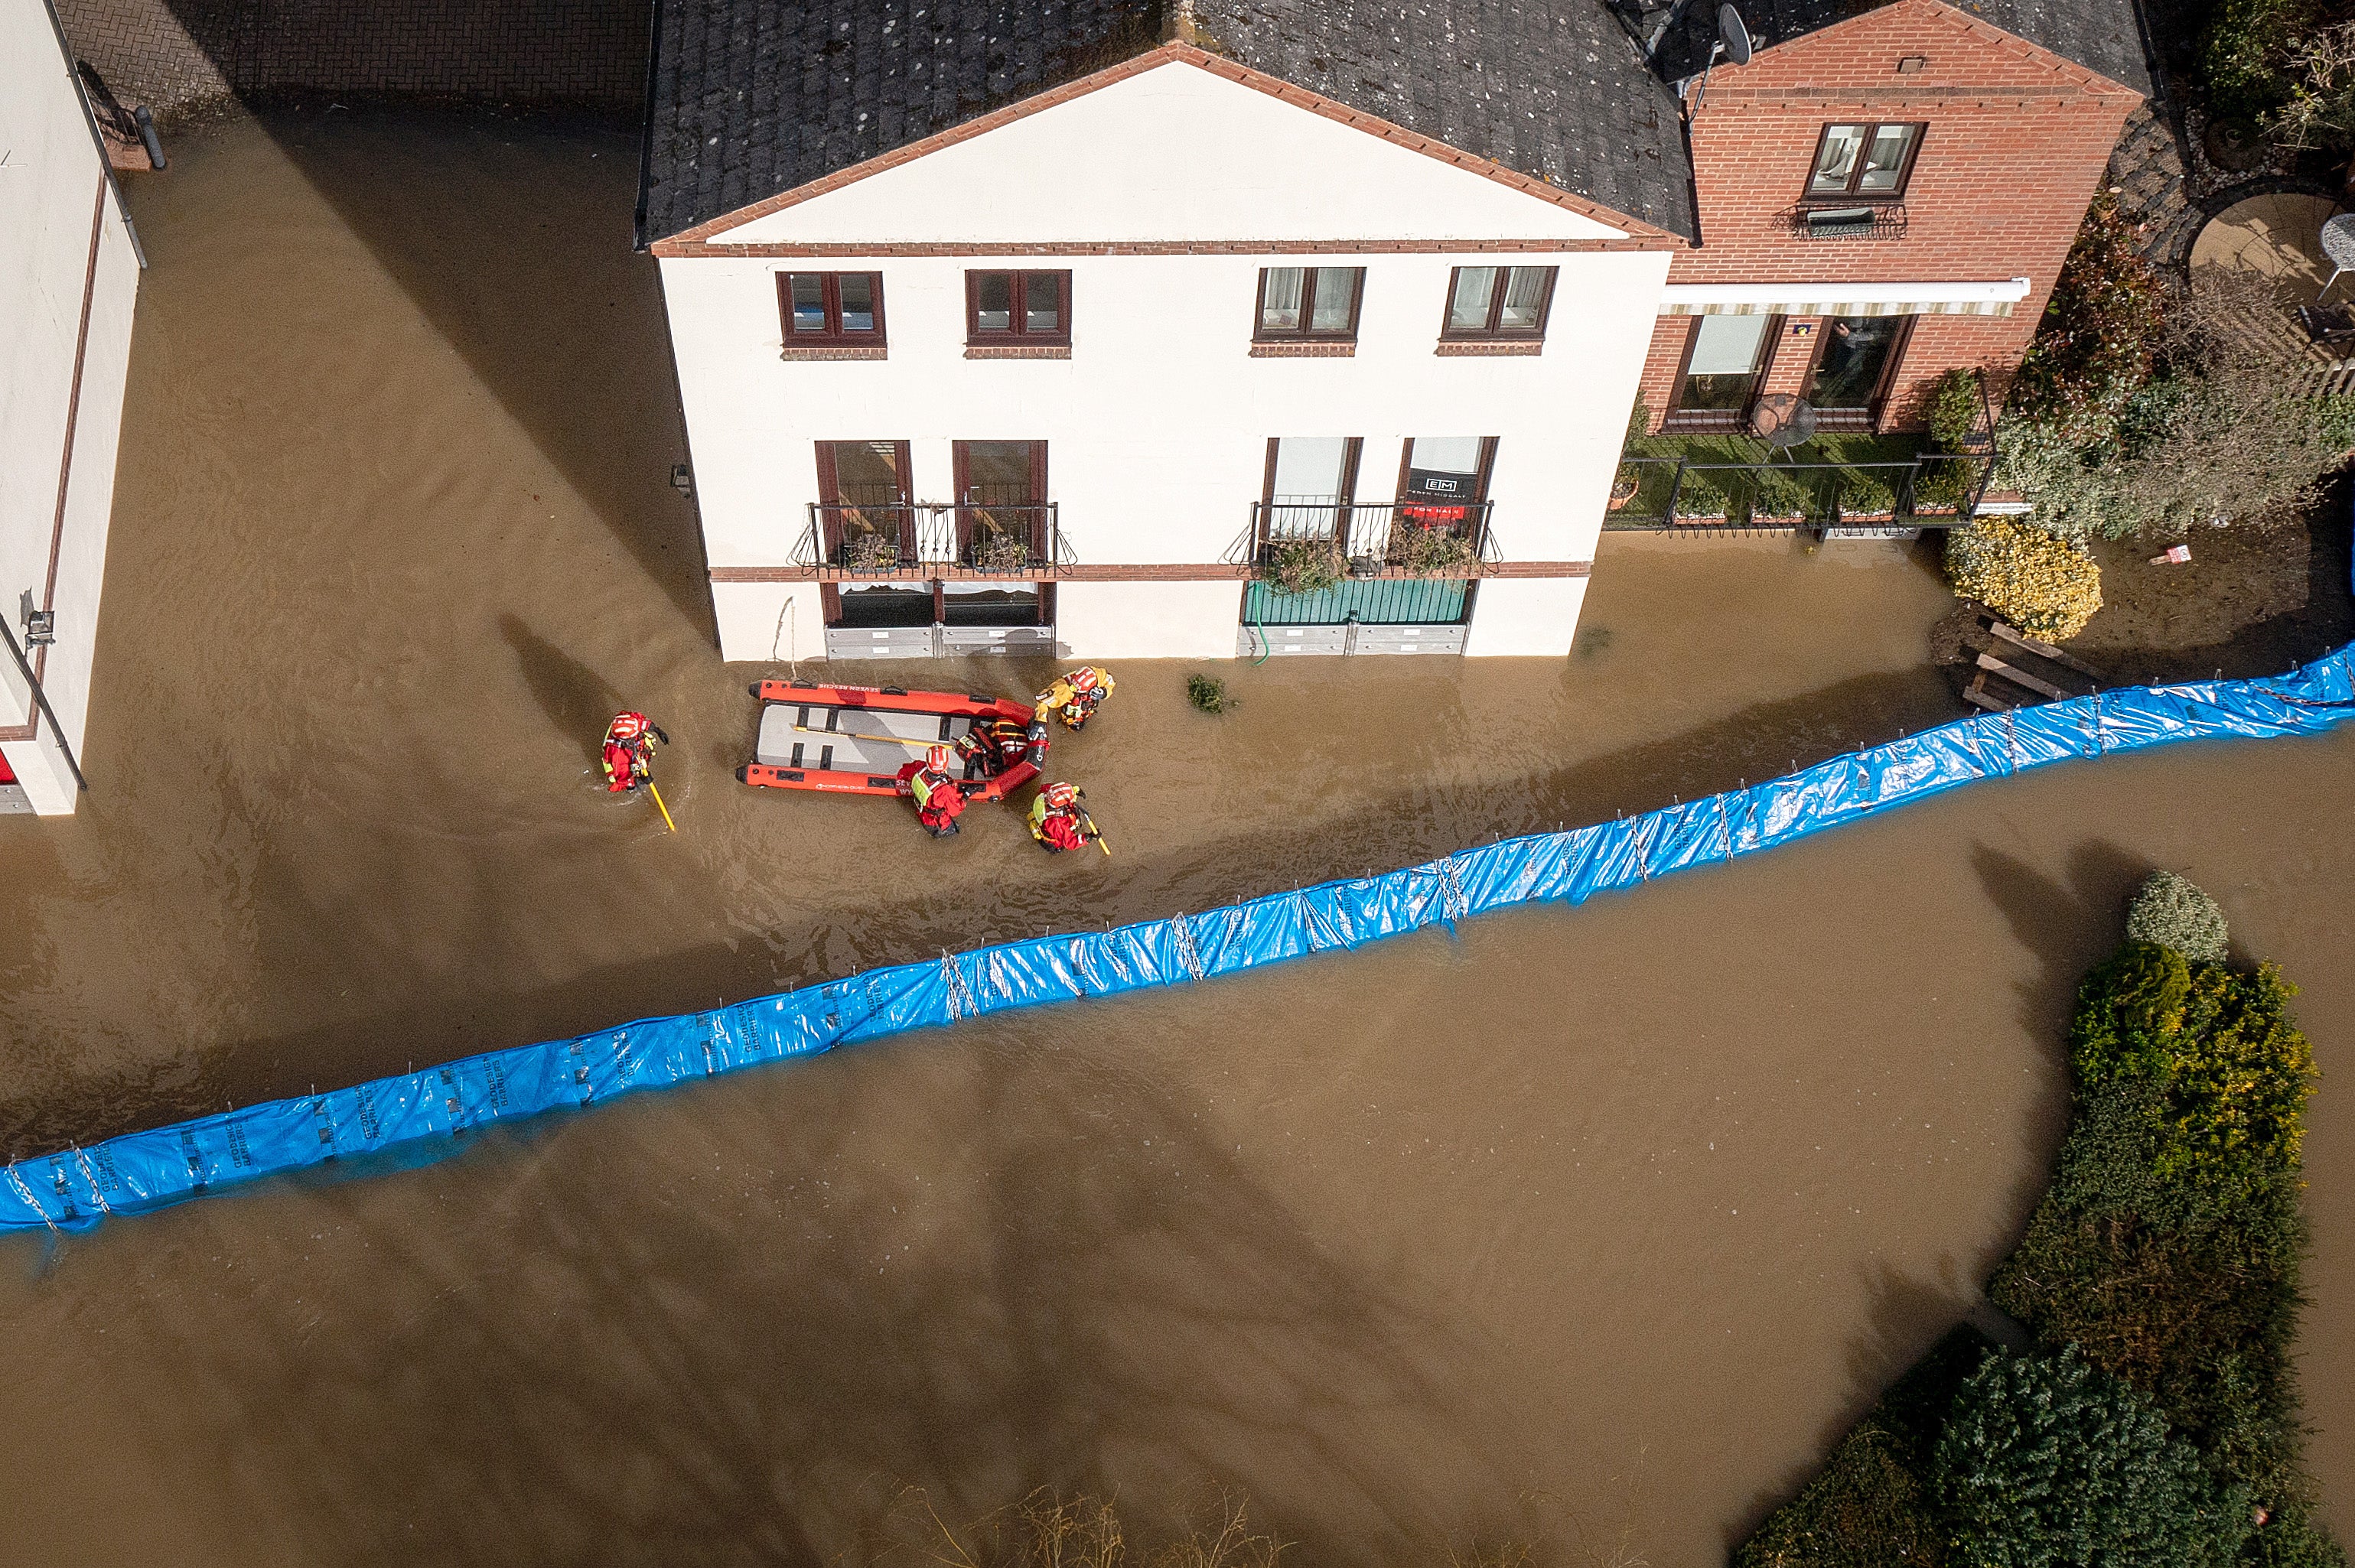 Rescuers wade through flood water in Bewdley to check on the welfare of residents after the River Severn breached defences on 23 February 2022 in Worcestershire